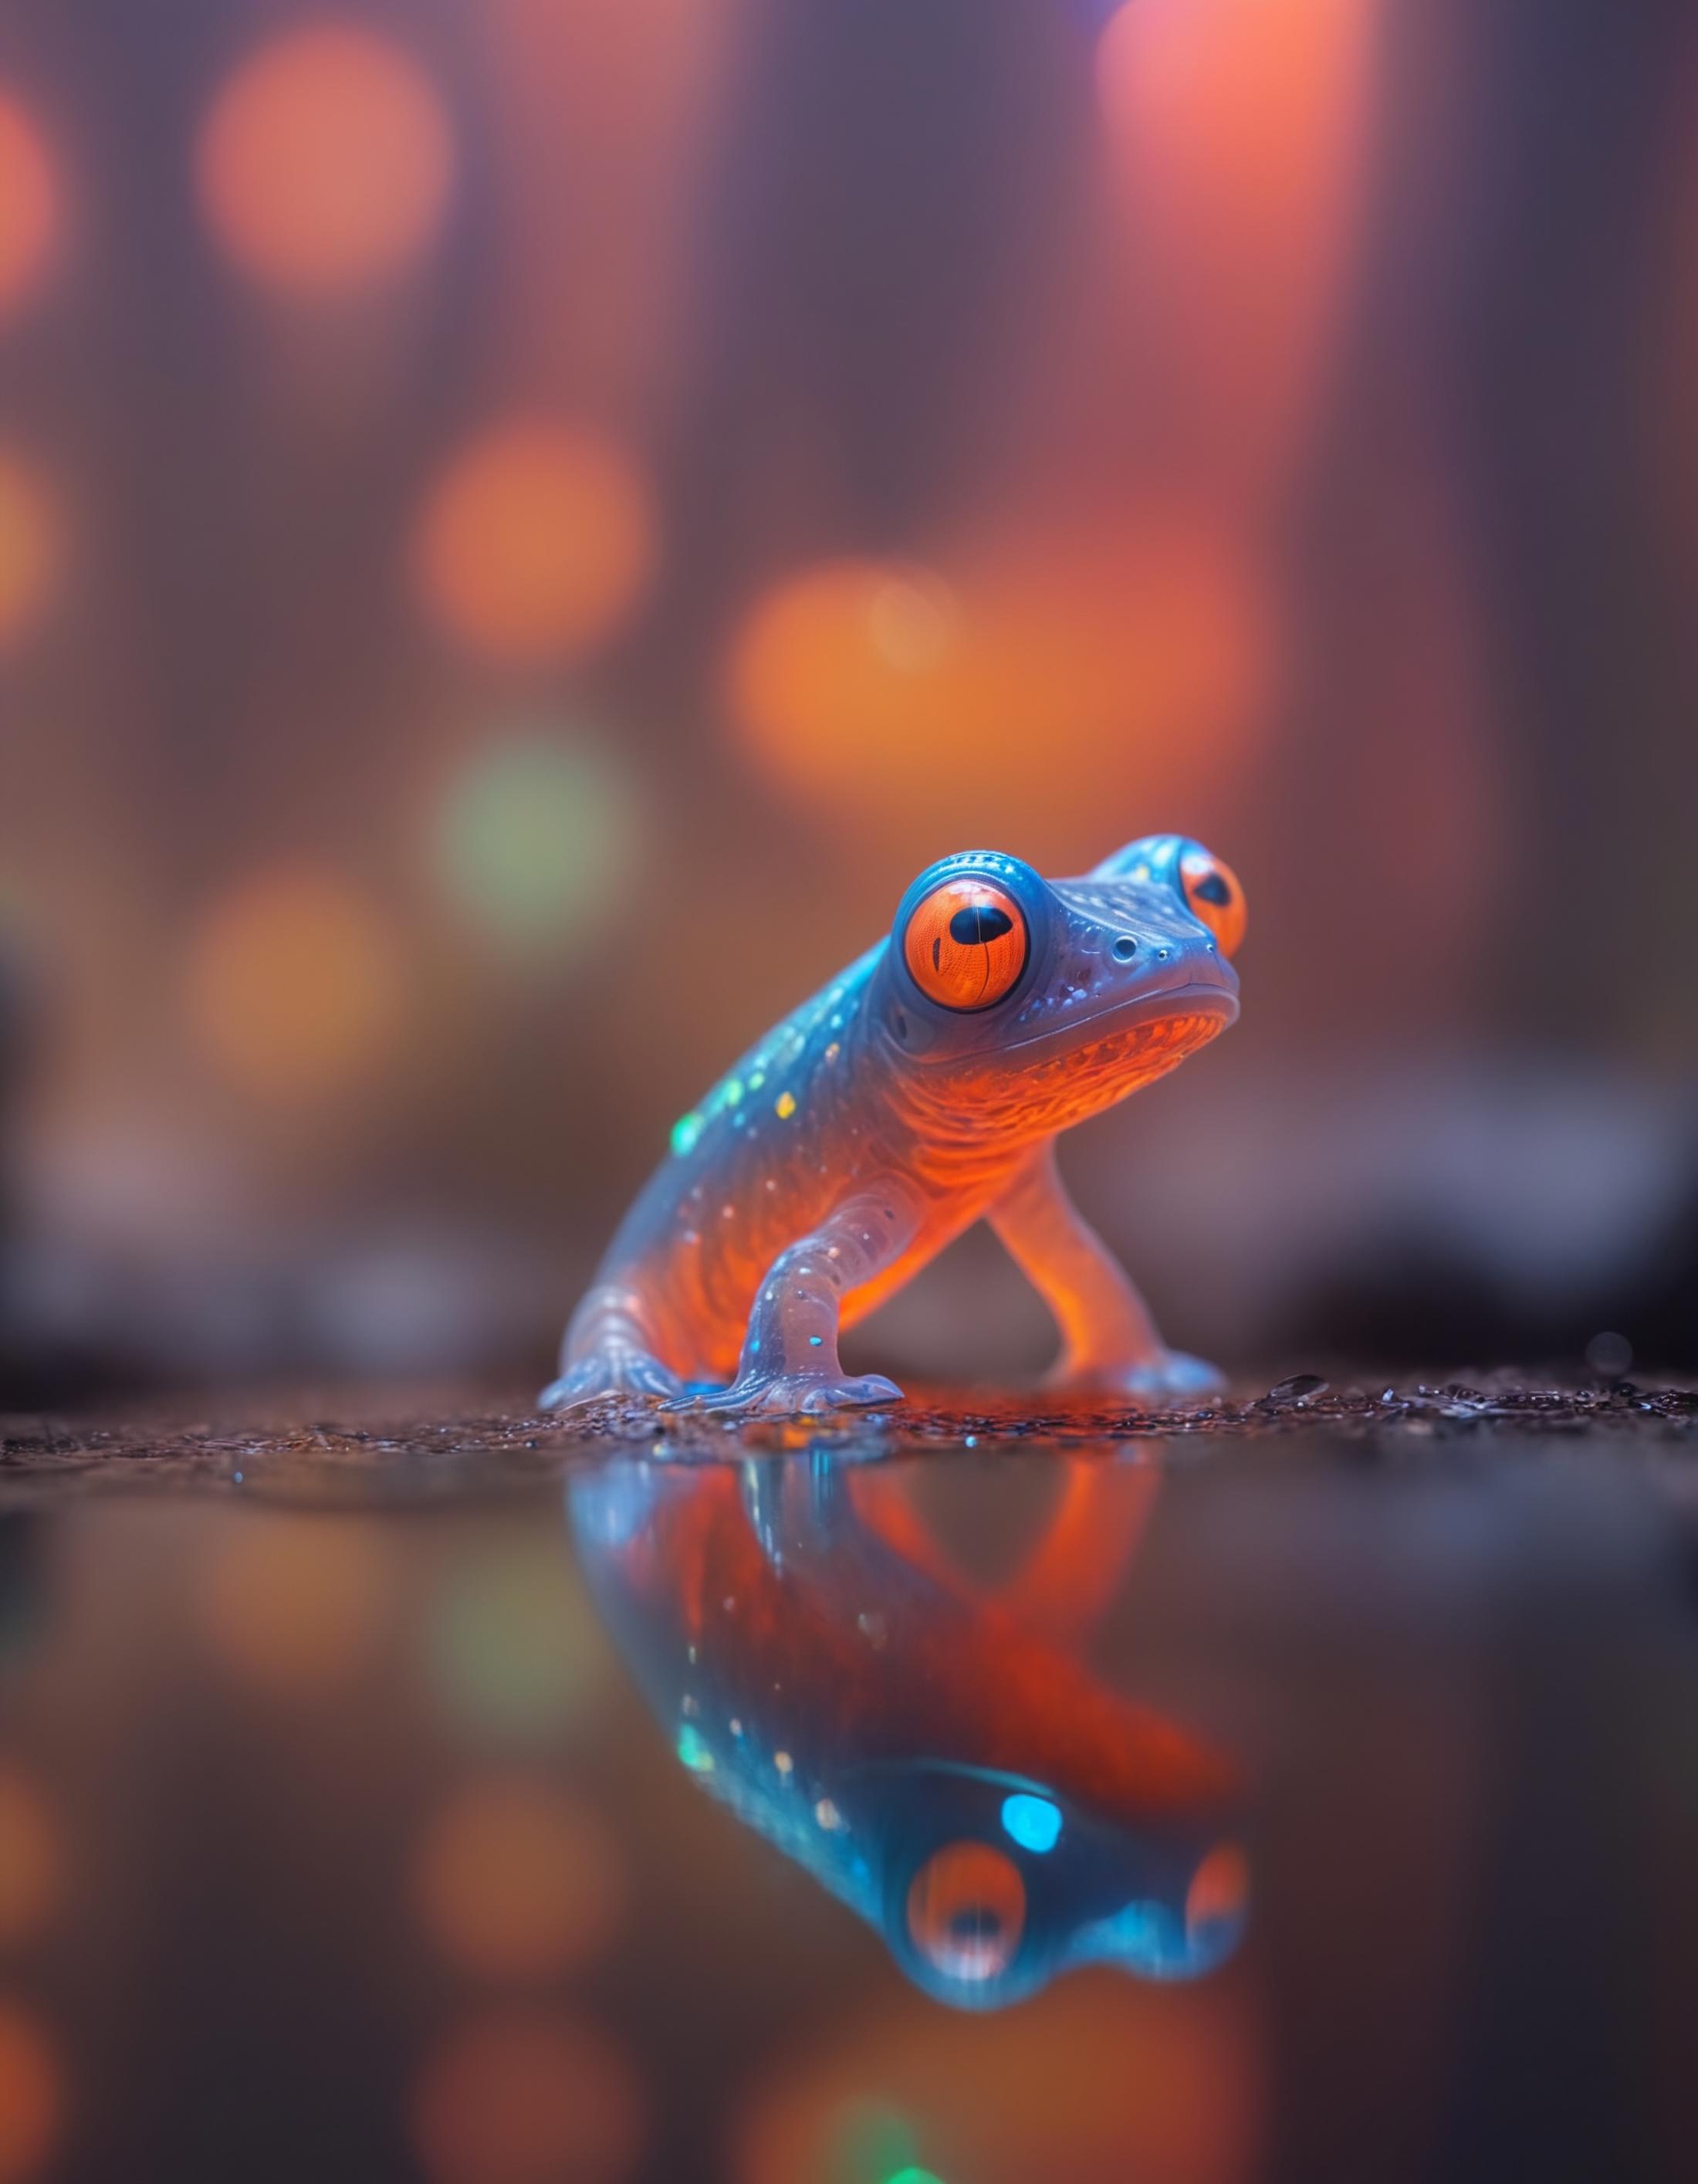 A small, colorful frog on a damp surface.